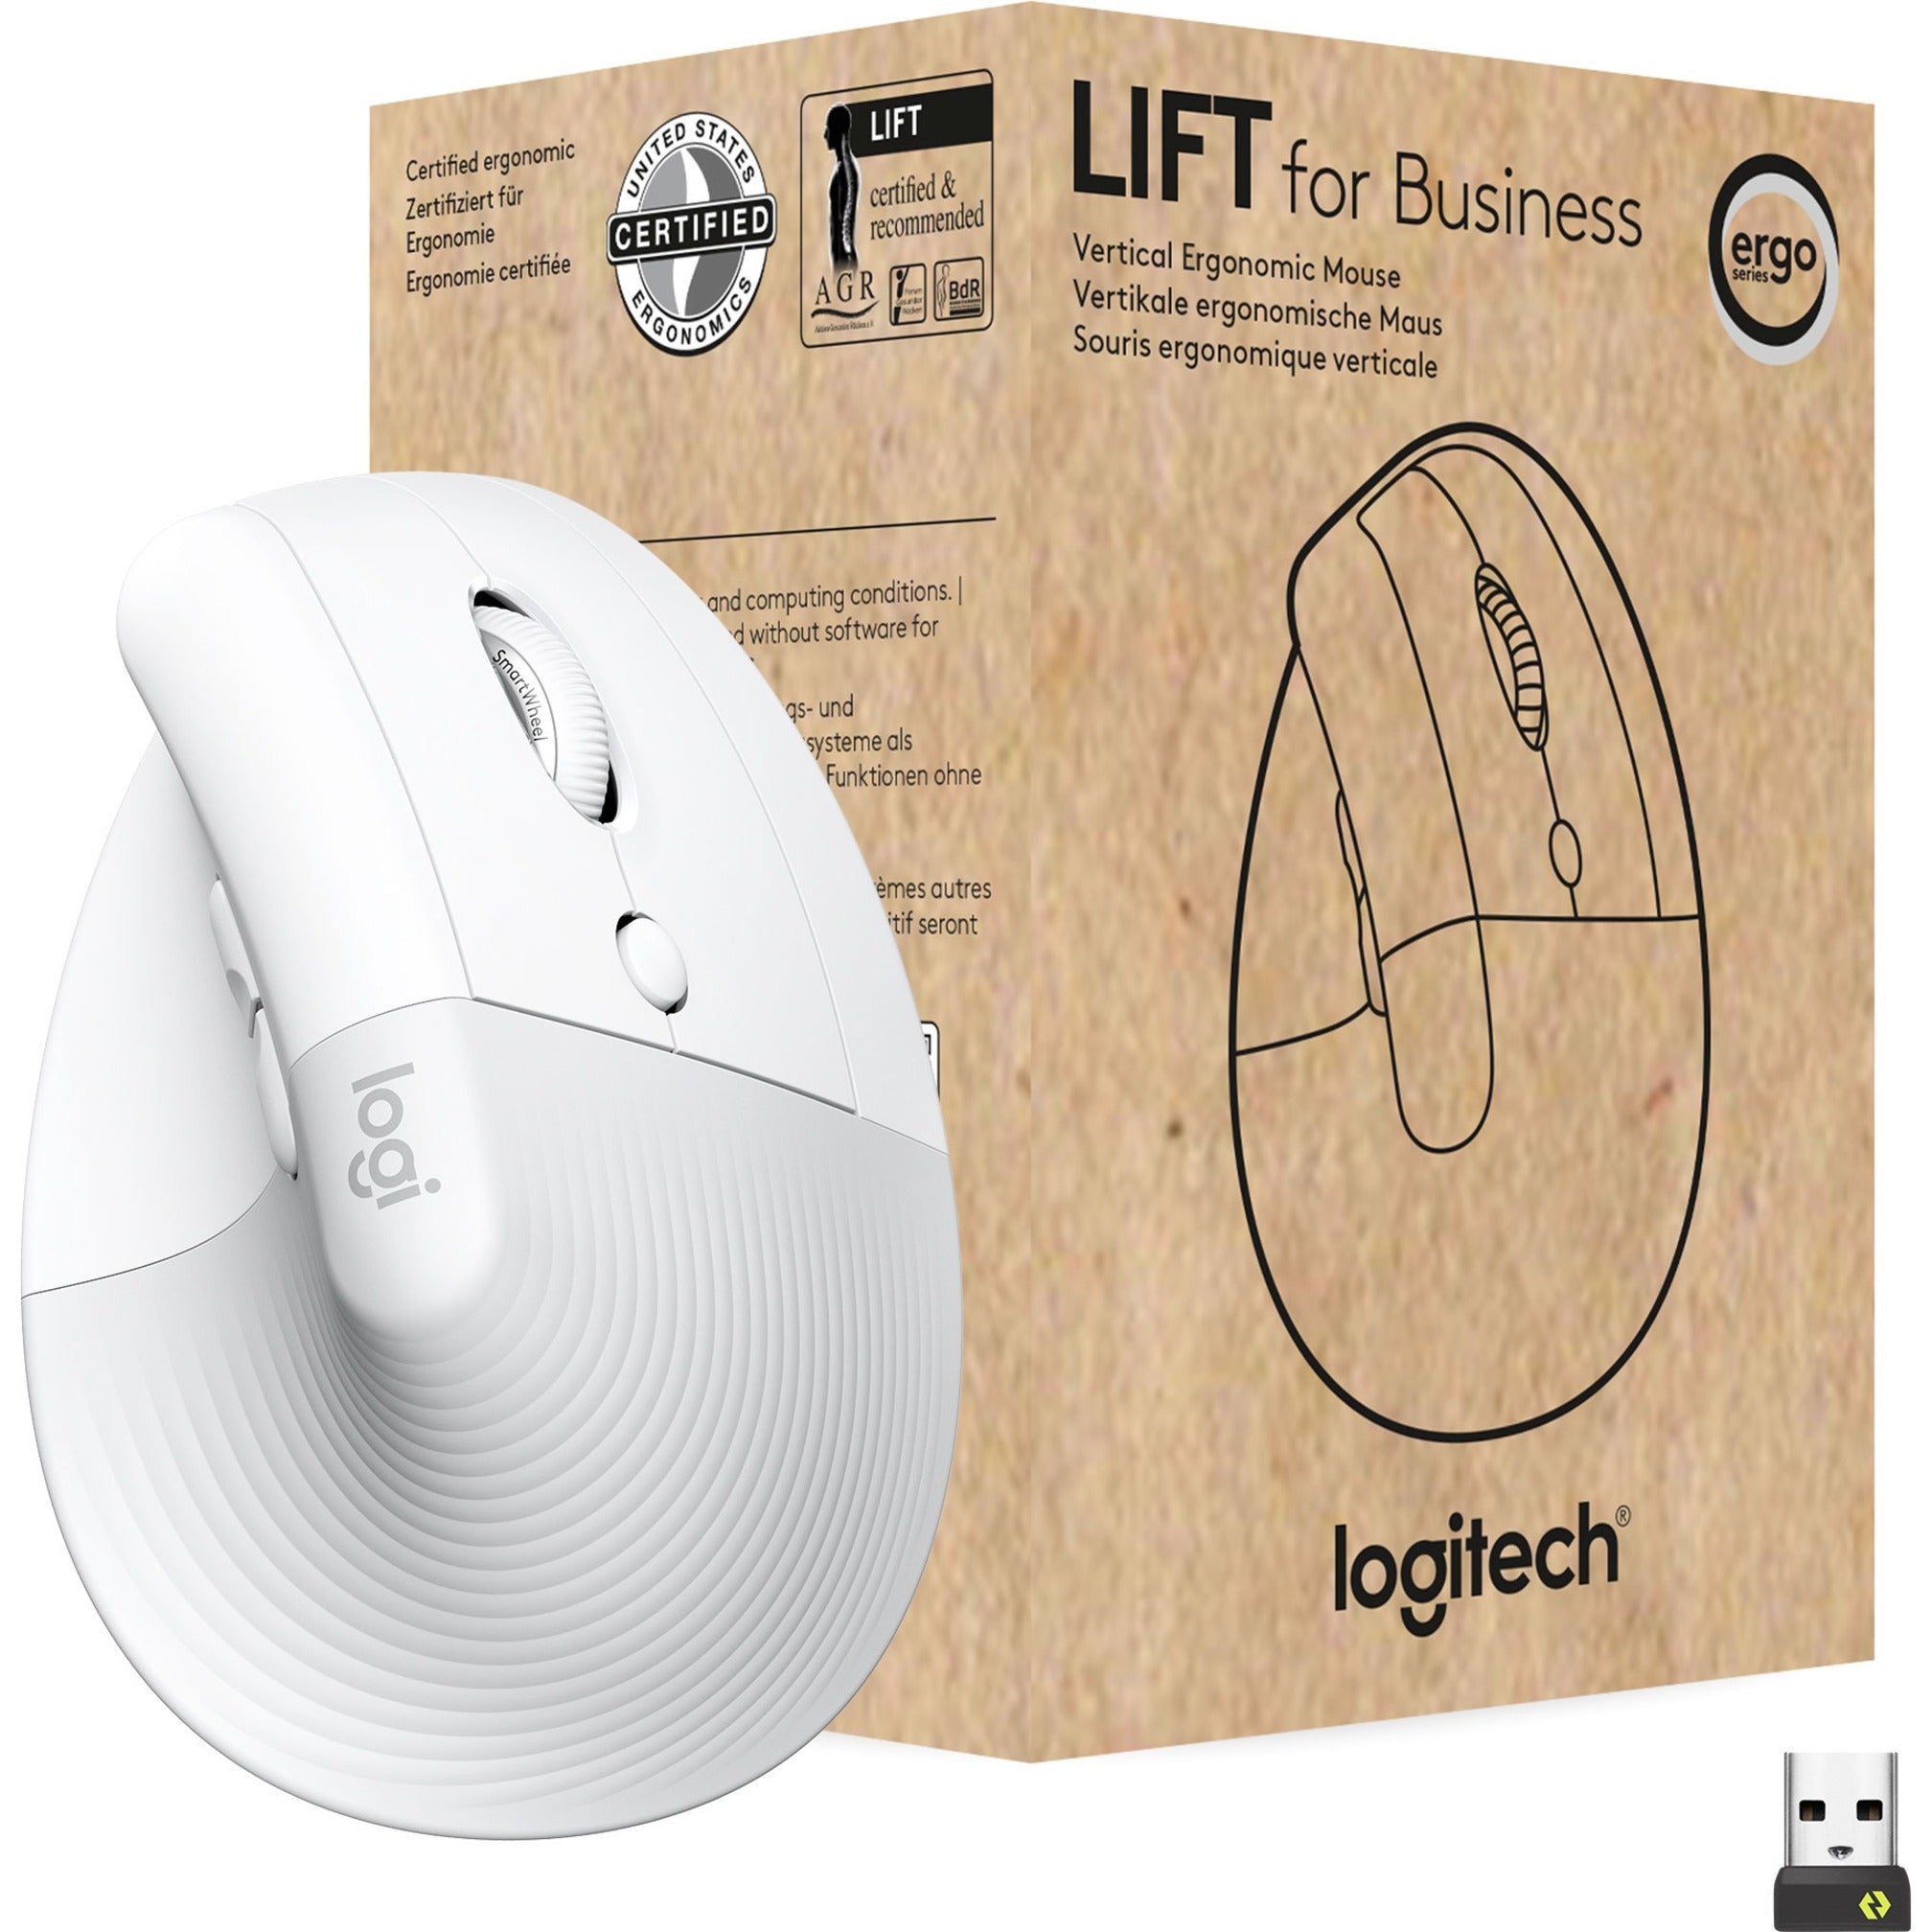 Logitech 910-006493 Lift Ergo Mouse, Wireless Bluetooth/Radio Frequency Mouse for PC, Mac, Tablet